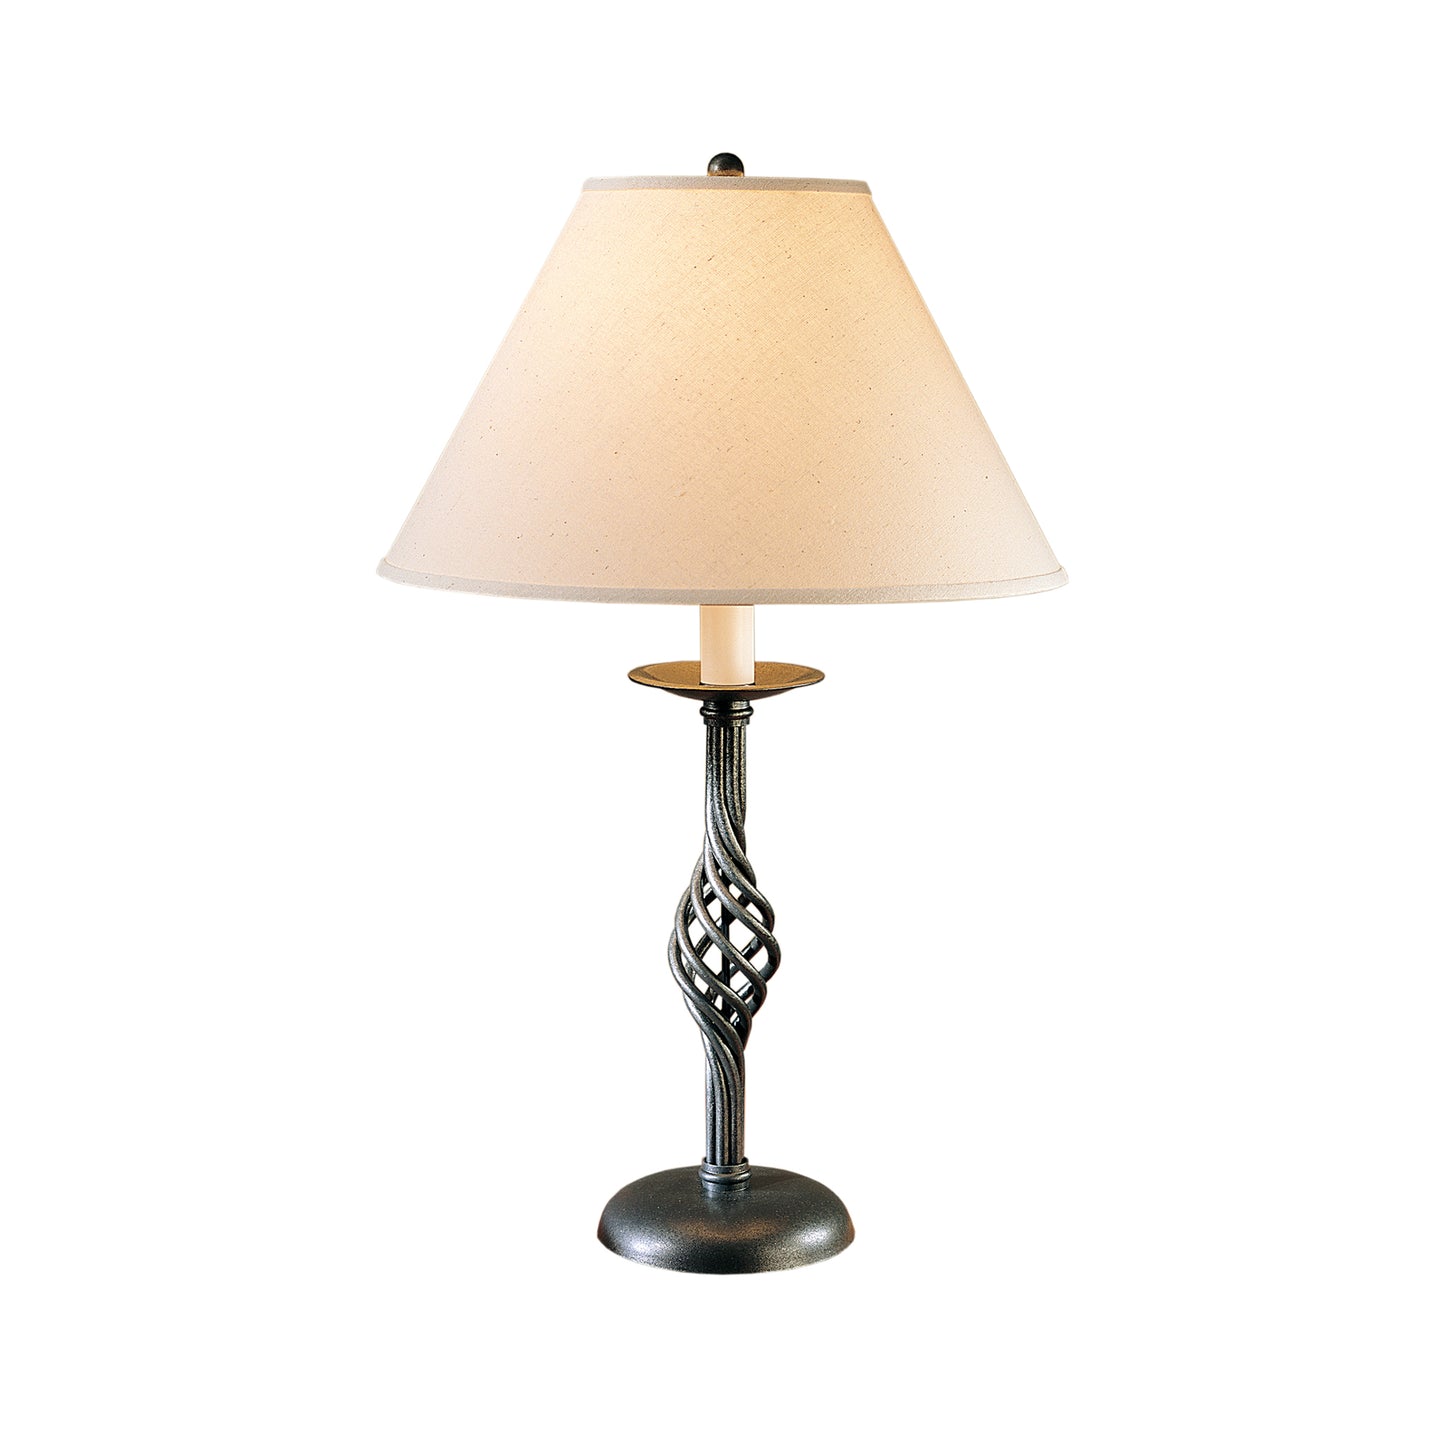 A Hubbardton Forge Twist Basket Table Lamp with a beige shade.